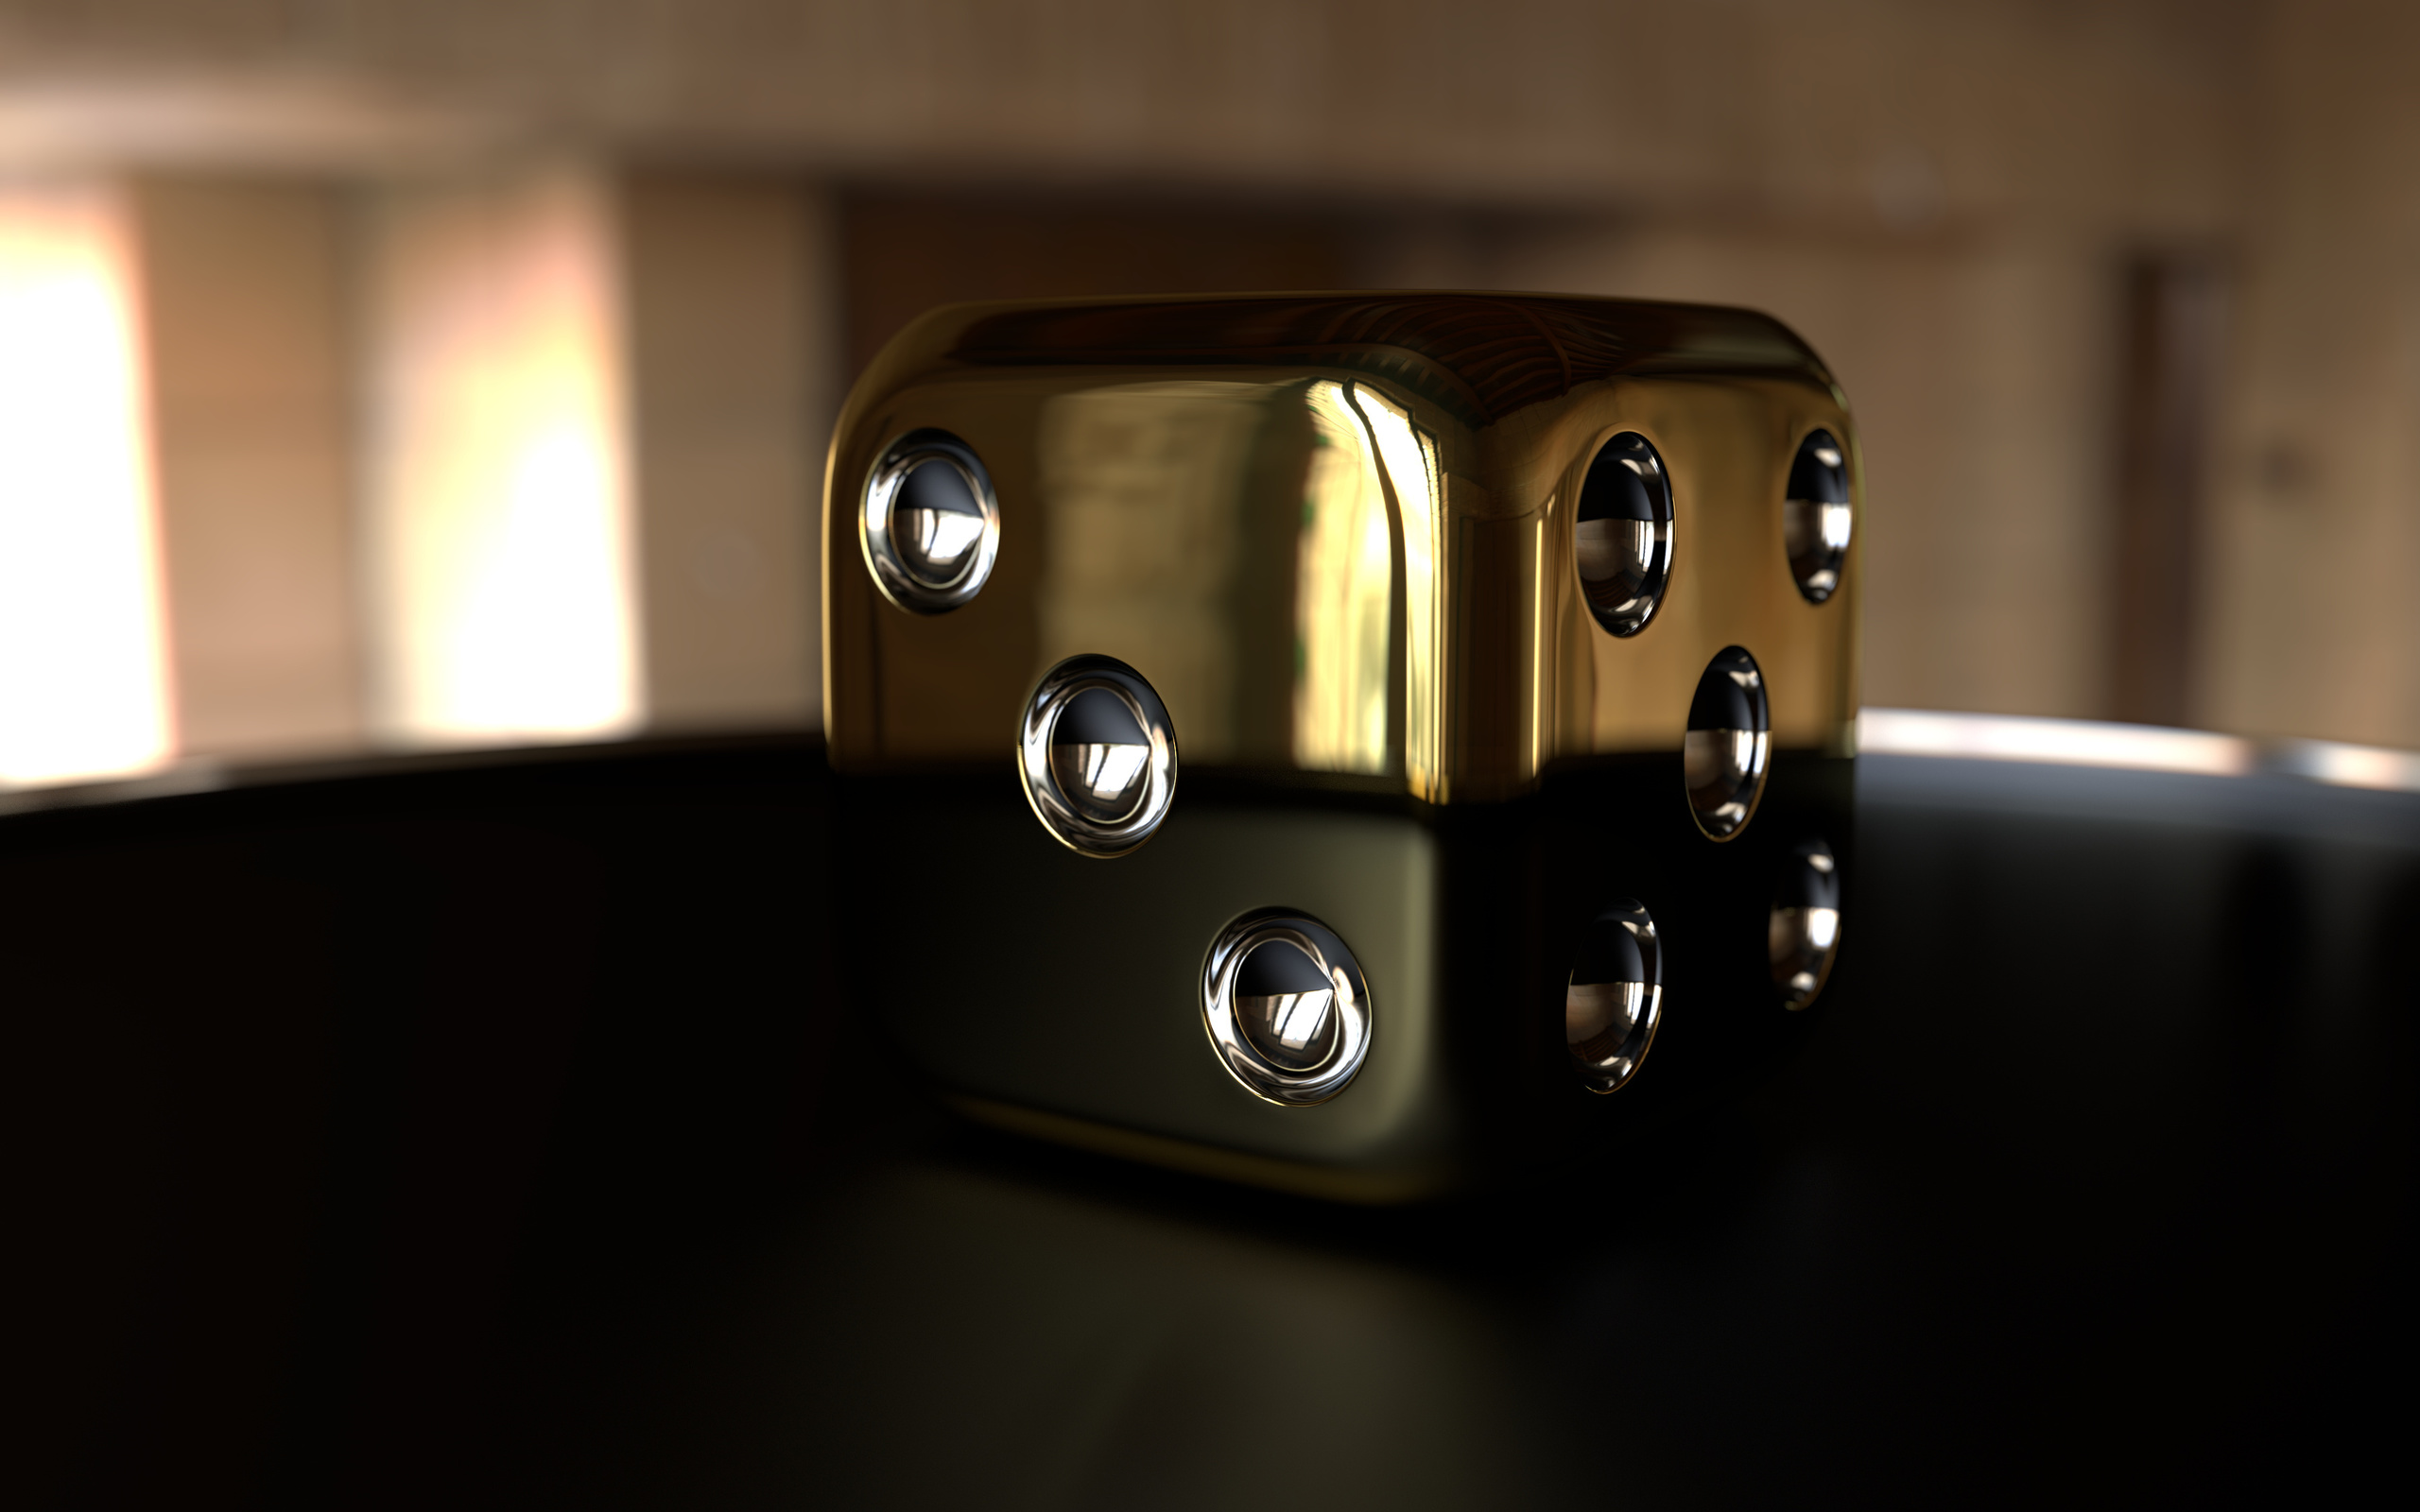 3d cube, headwitcher, modeling, abstract, visualization